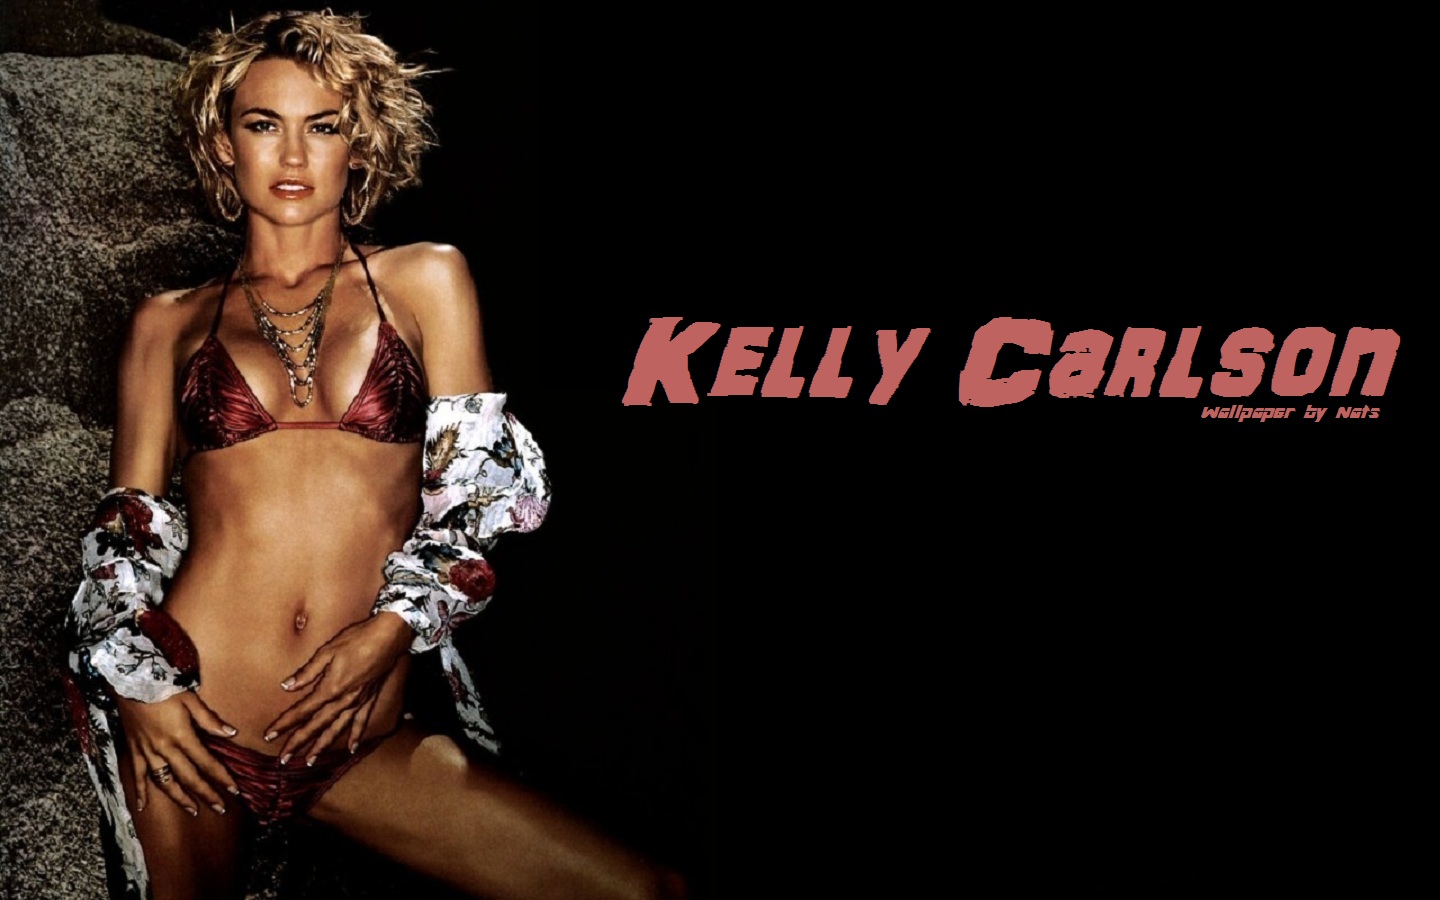 Download High quality Kelly Carlson wallpaper / Celebrities Female / 1440x900